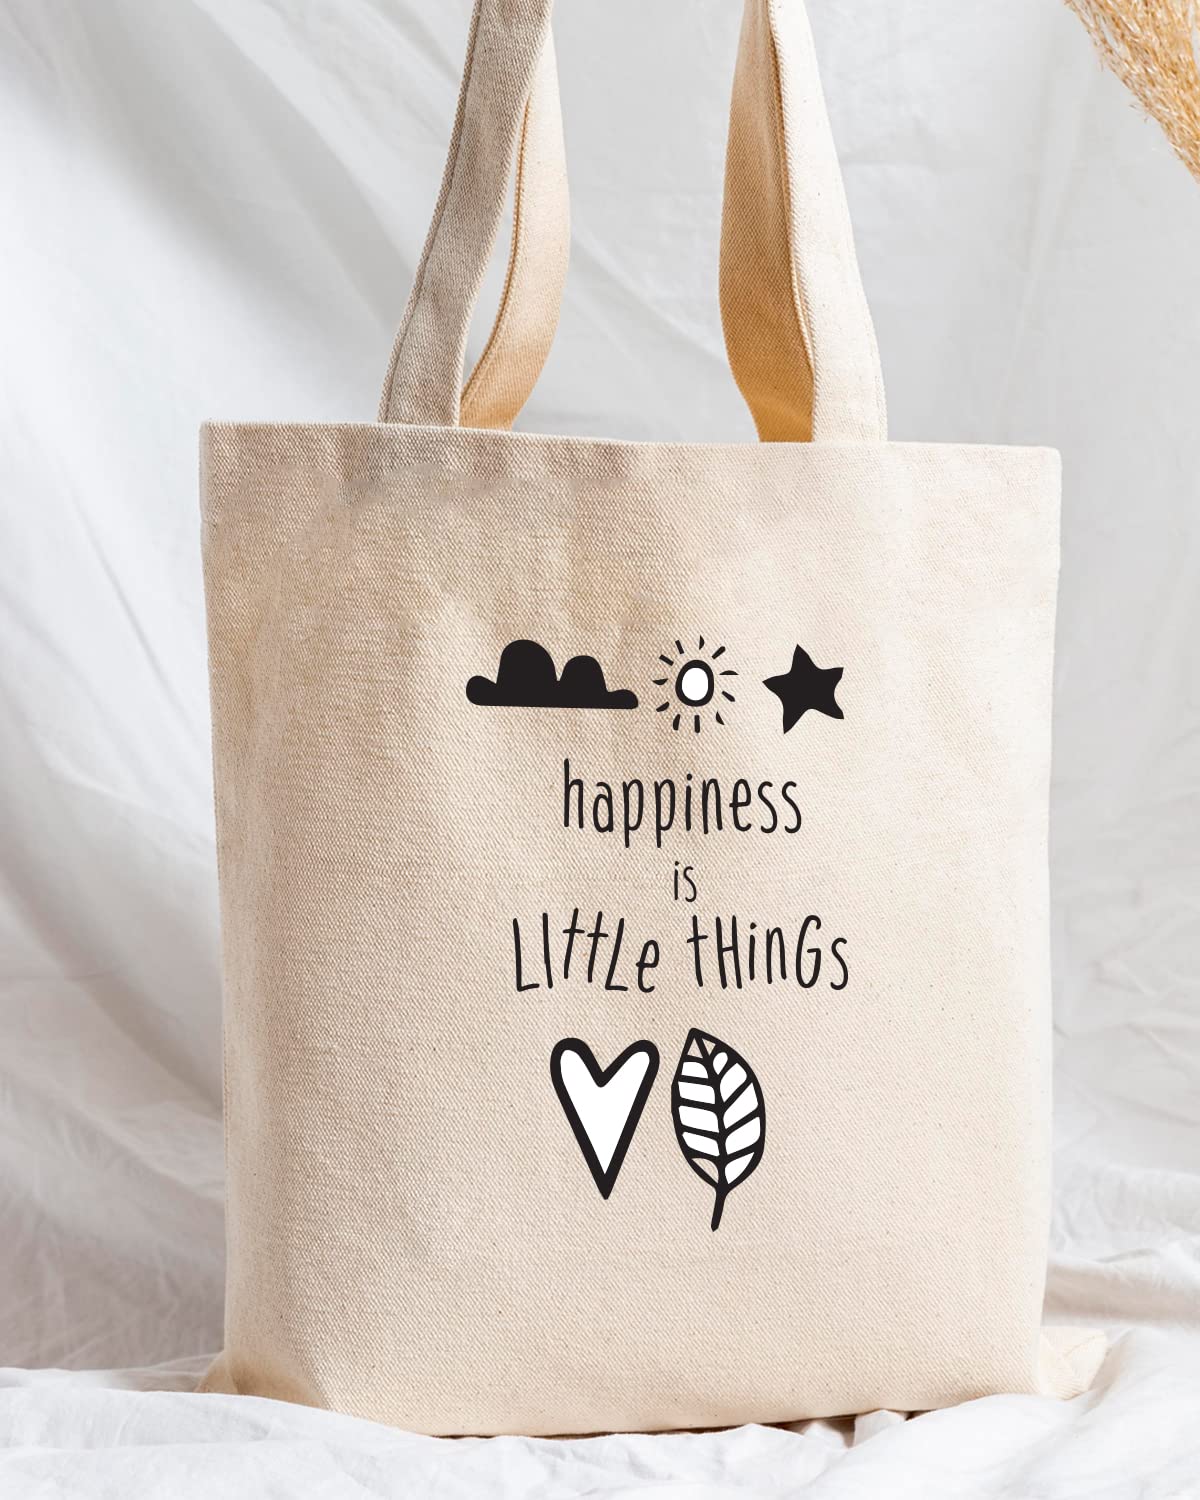 The Pink Magnet Happiness Is Little Things Tote Bag - Canvas Tote Bag for Women | Printed Multipurpose Cotton Bags | Cute Hand Bag for Girls | Best for College, Travel, Grocery | Reusable Shopping Bag